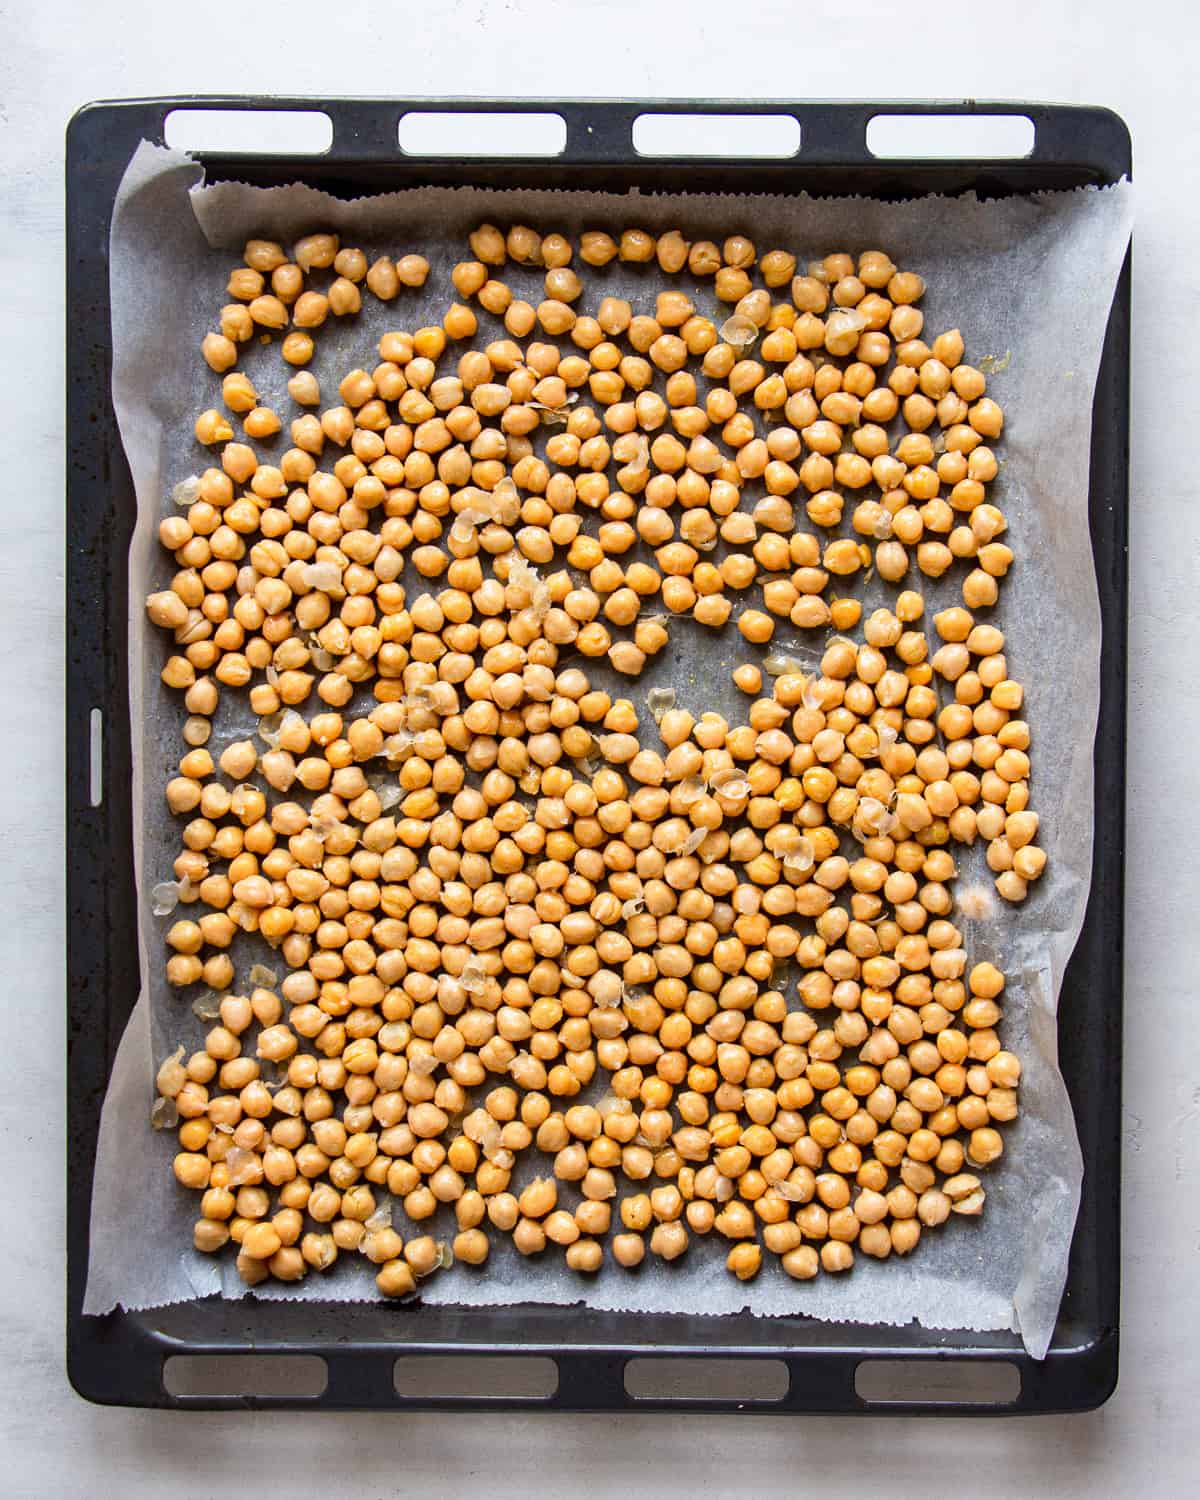 Seasoned chickpeas on a parchment linked baking tray.